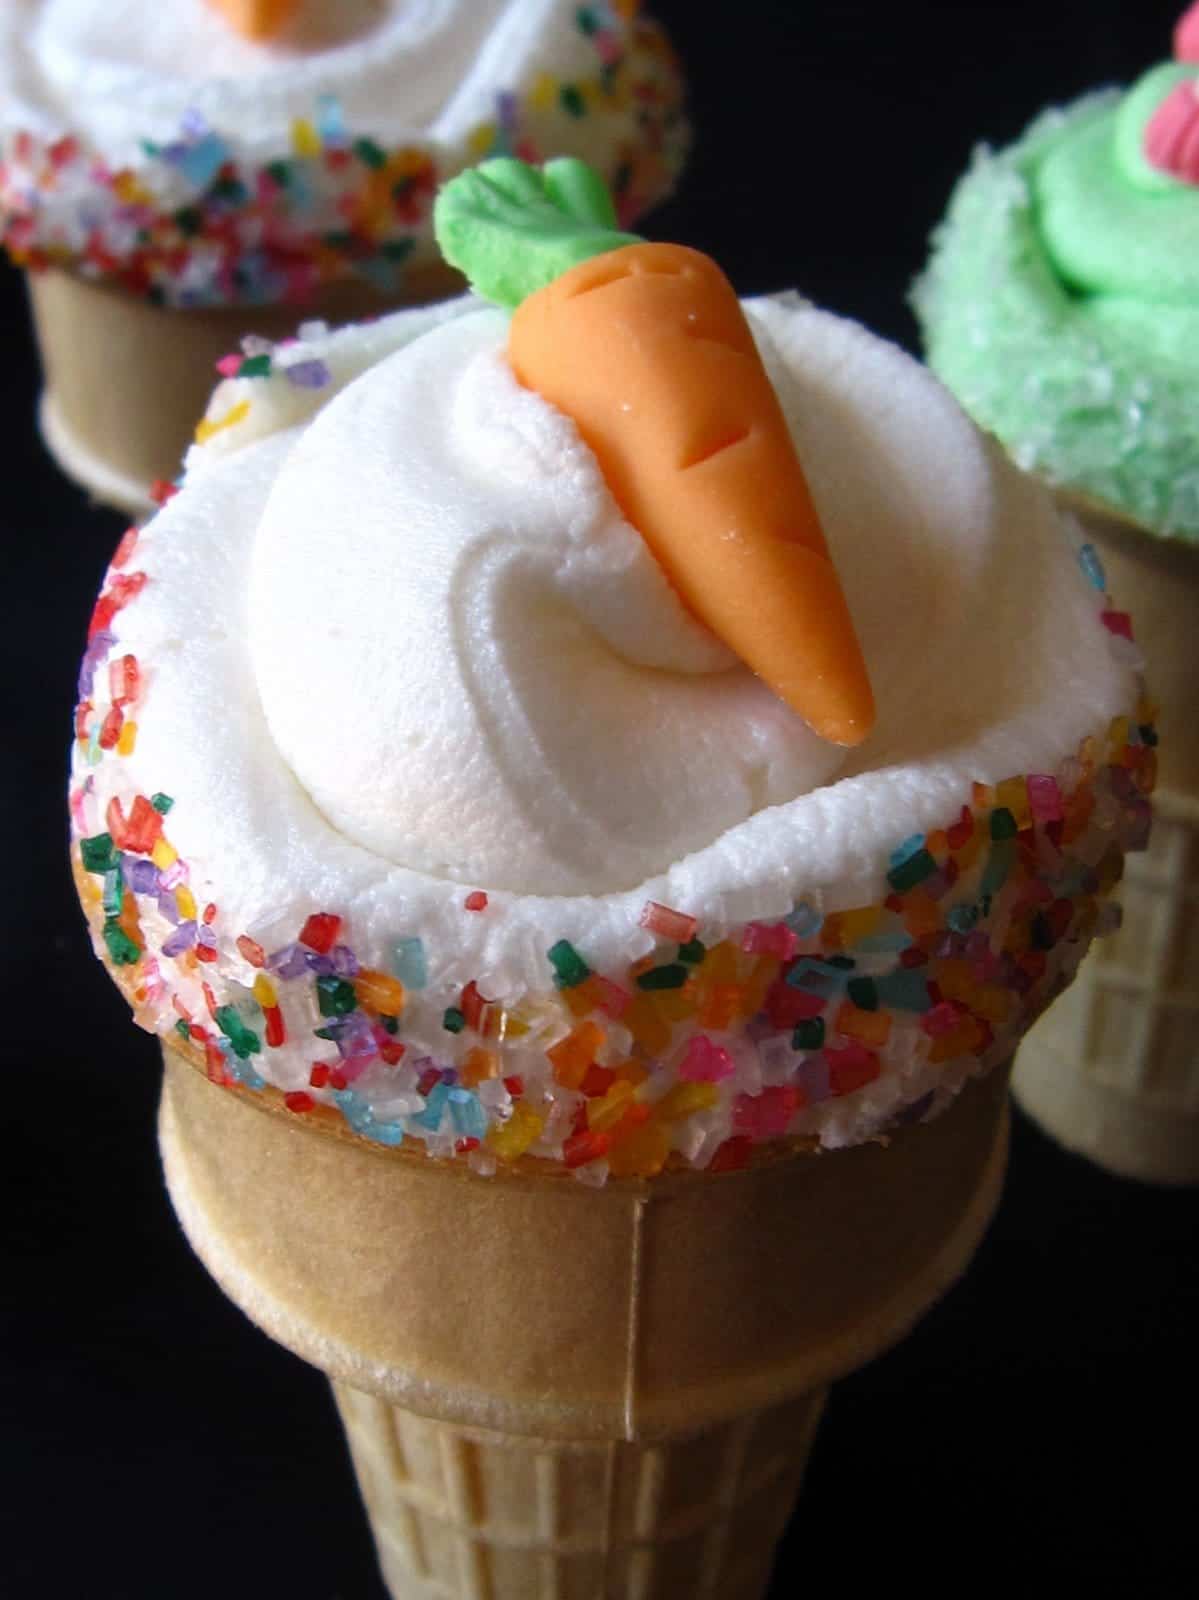 Overhead view of a cupcake in an ice cream cone with a carrot decoration on top